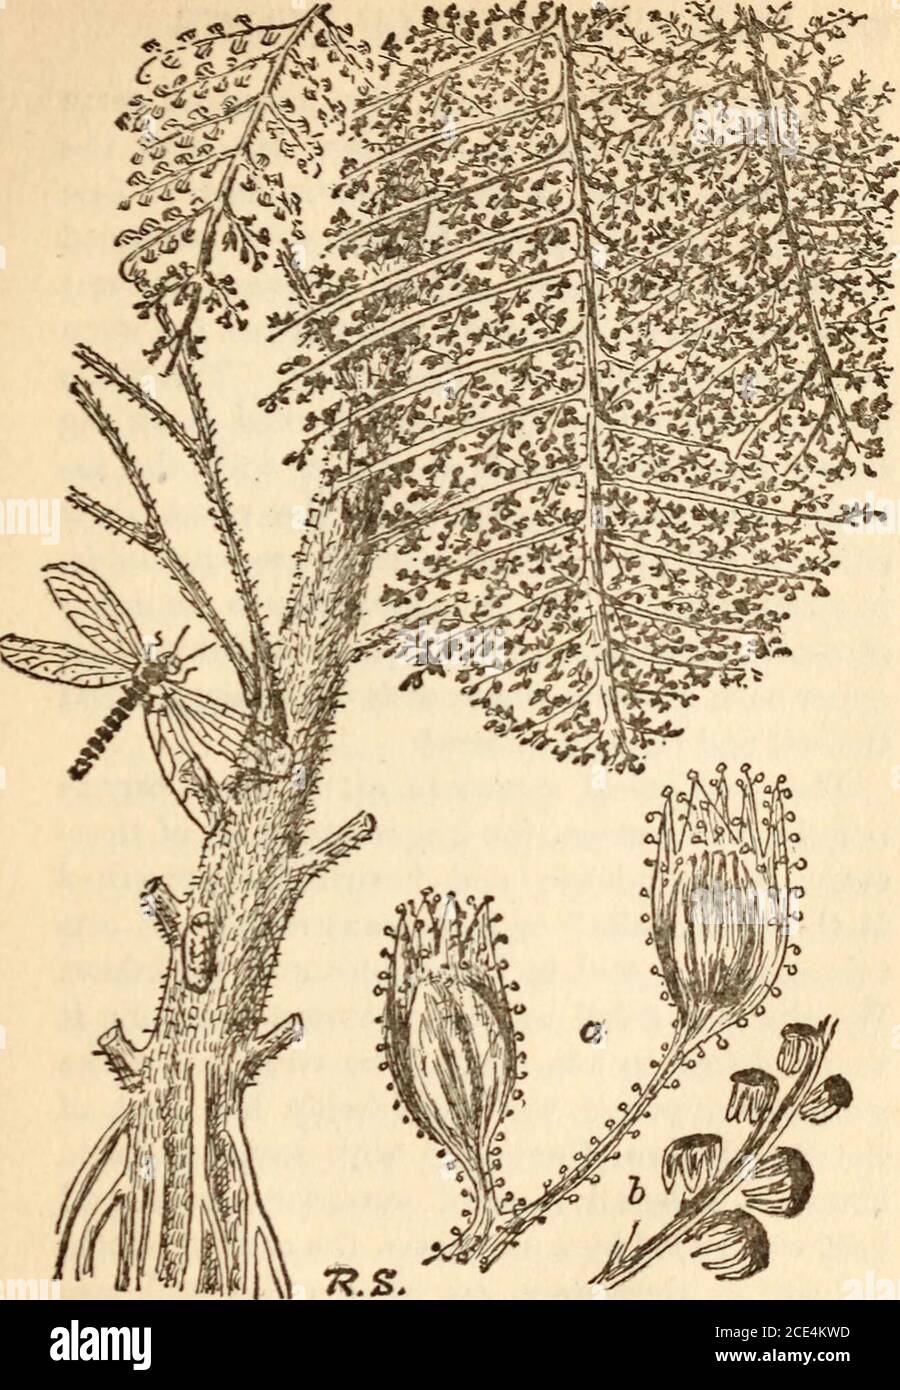 . Evolution of plants . 1905. We will not, however,follow historically the stages of reconstruction,but will briefly give the results as they nowstand. Lyginodendron oldhamium, a plant of theLower and Middle Coal Measures, has beendescribed as a little Tree-fern in habit; thestem was long and slender, seldom reaching twoinches in diameter. It is possible that it maynot have been upright, and that it supporteditself with the help of stronger neighbours; thepresence of spines all over the stem and leaves,like those on the climbing fronds of the WestIndian Bramble Fern (Davallia aculeata), hassug Stock Photo